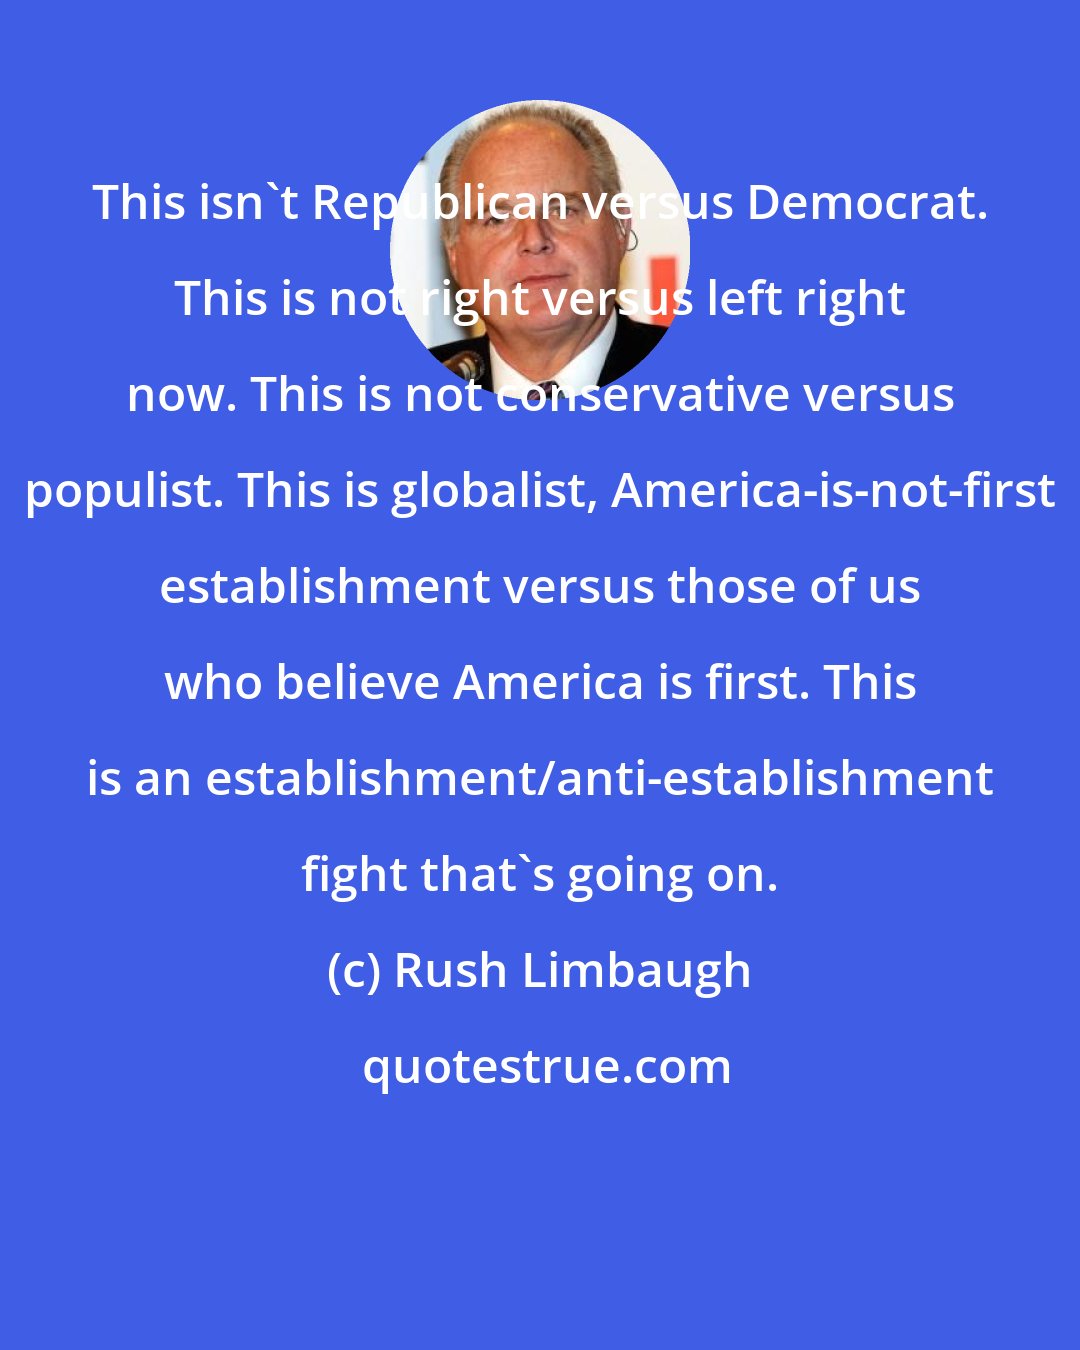 Rush Limbaugh: This isn't Republican versus Democrat. This is not right versus left right now. This is not conservative versus populist. This is globalist, America-is-not-first establishment versus those of us who believe America is first. This is an establishment/anti-establishment fight that's going on.